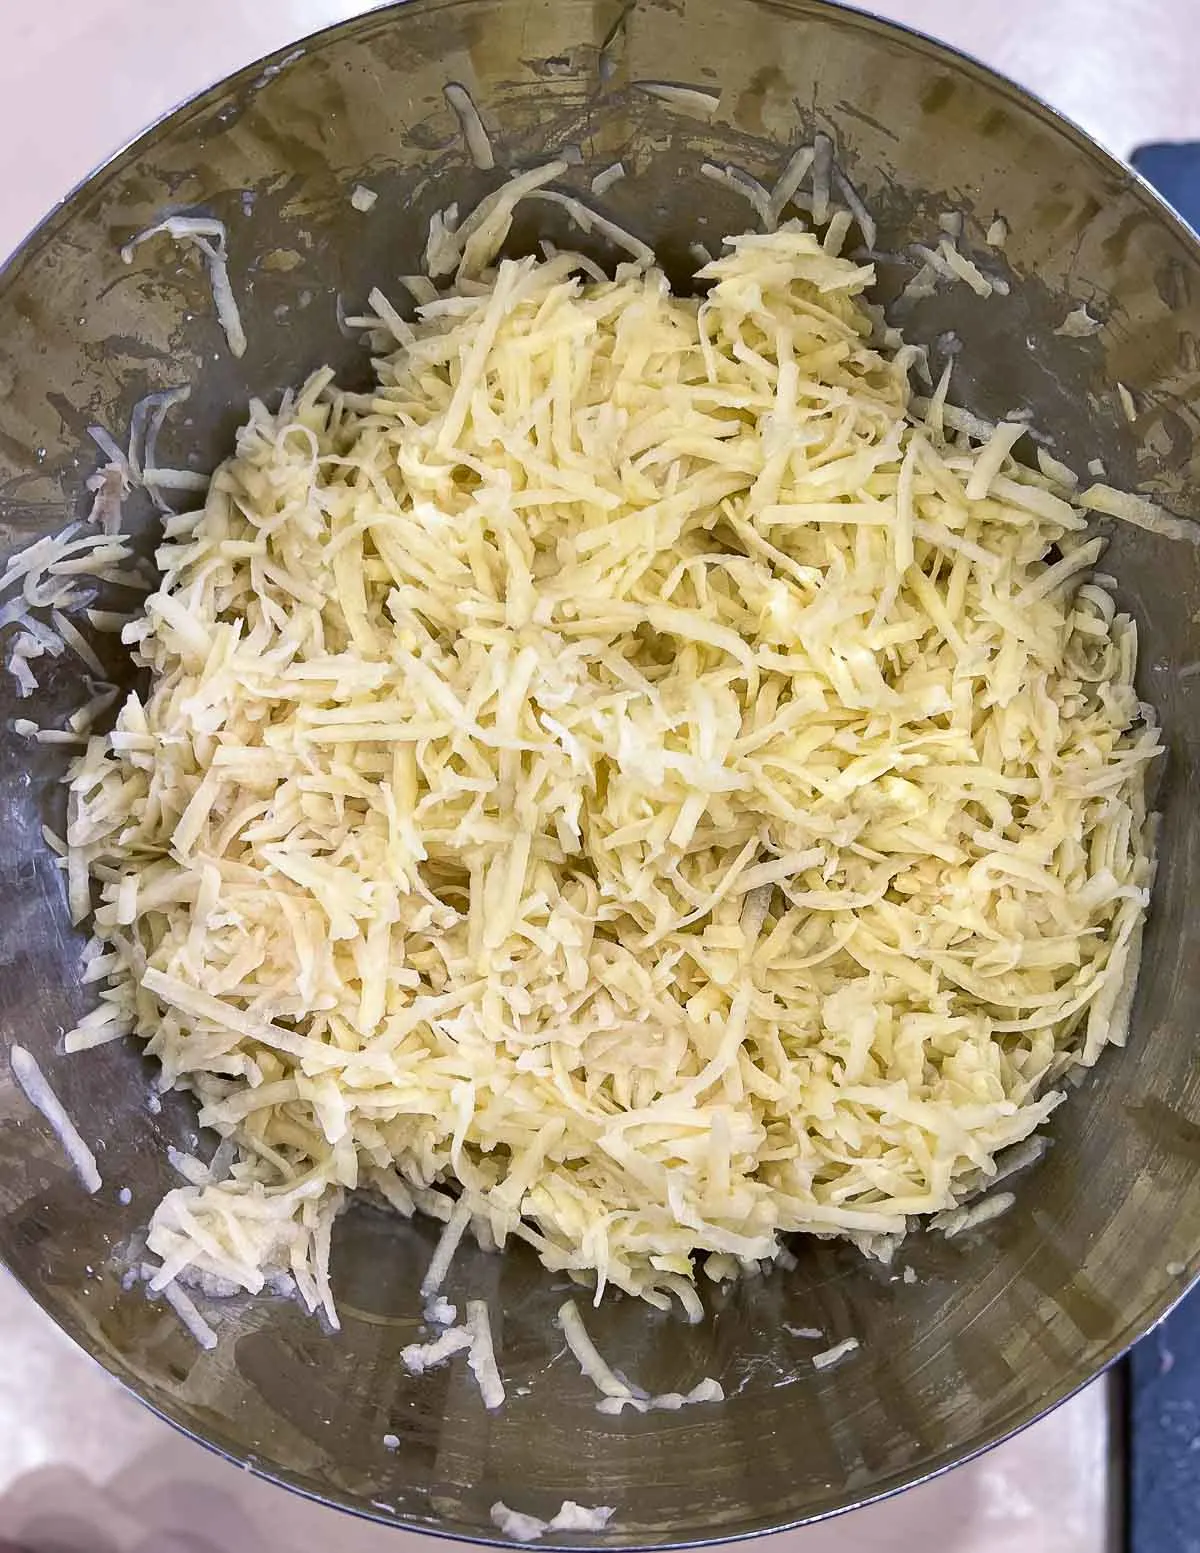 Grated potatoes in a bowl.